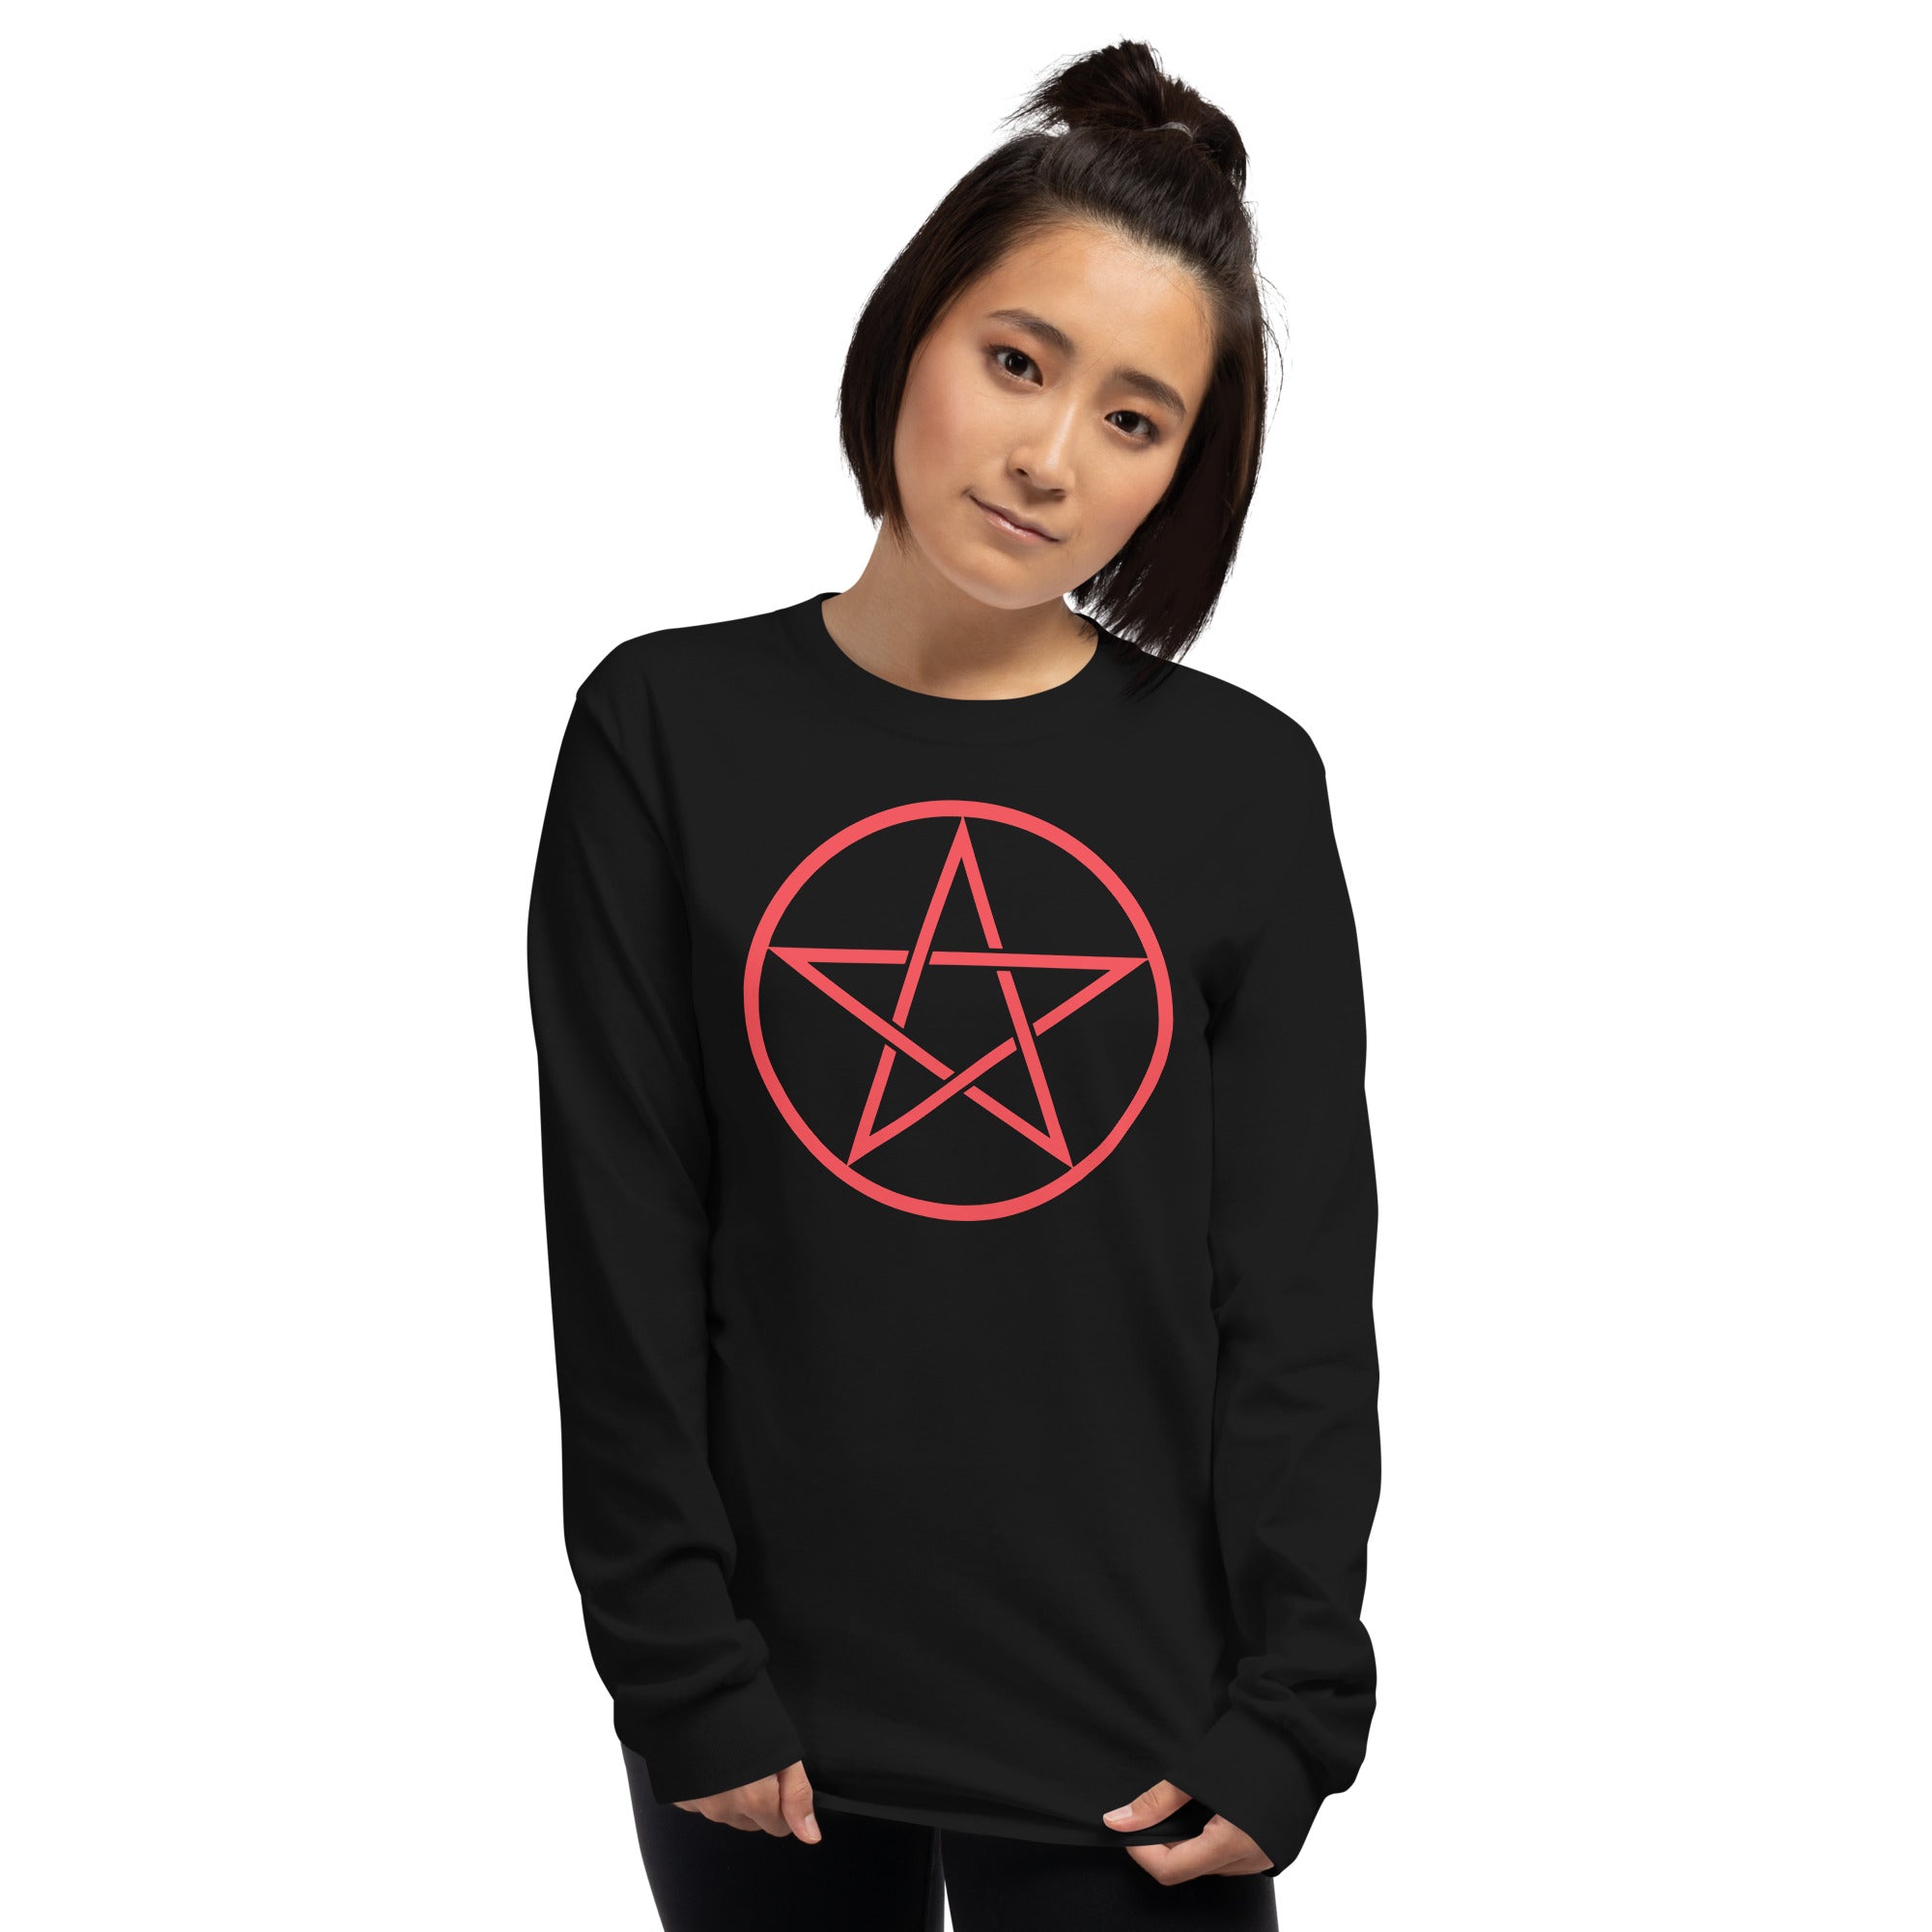 Red Goth Wiccan Woven Pentagram Long Sleeve Shirt - Edge of Life Designs